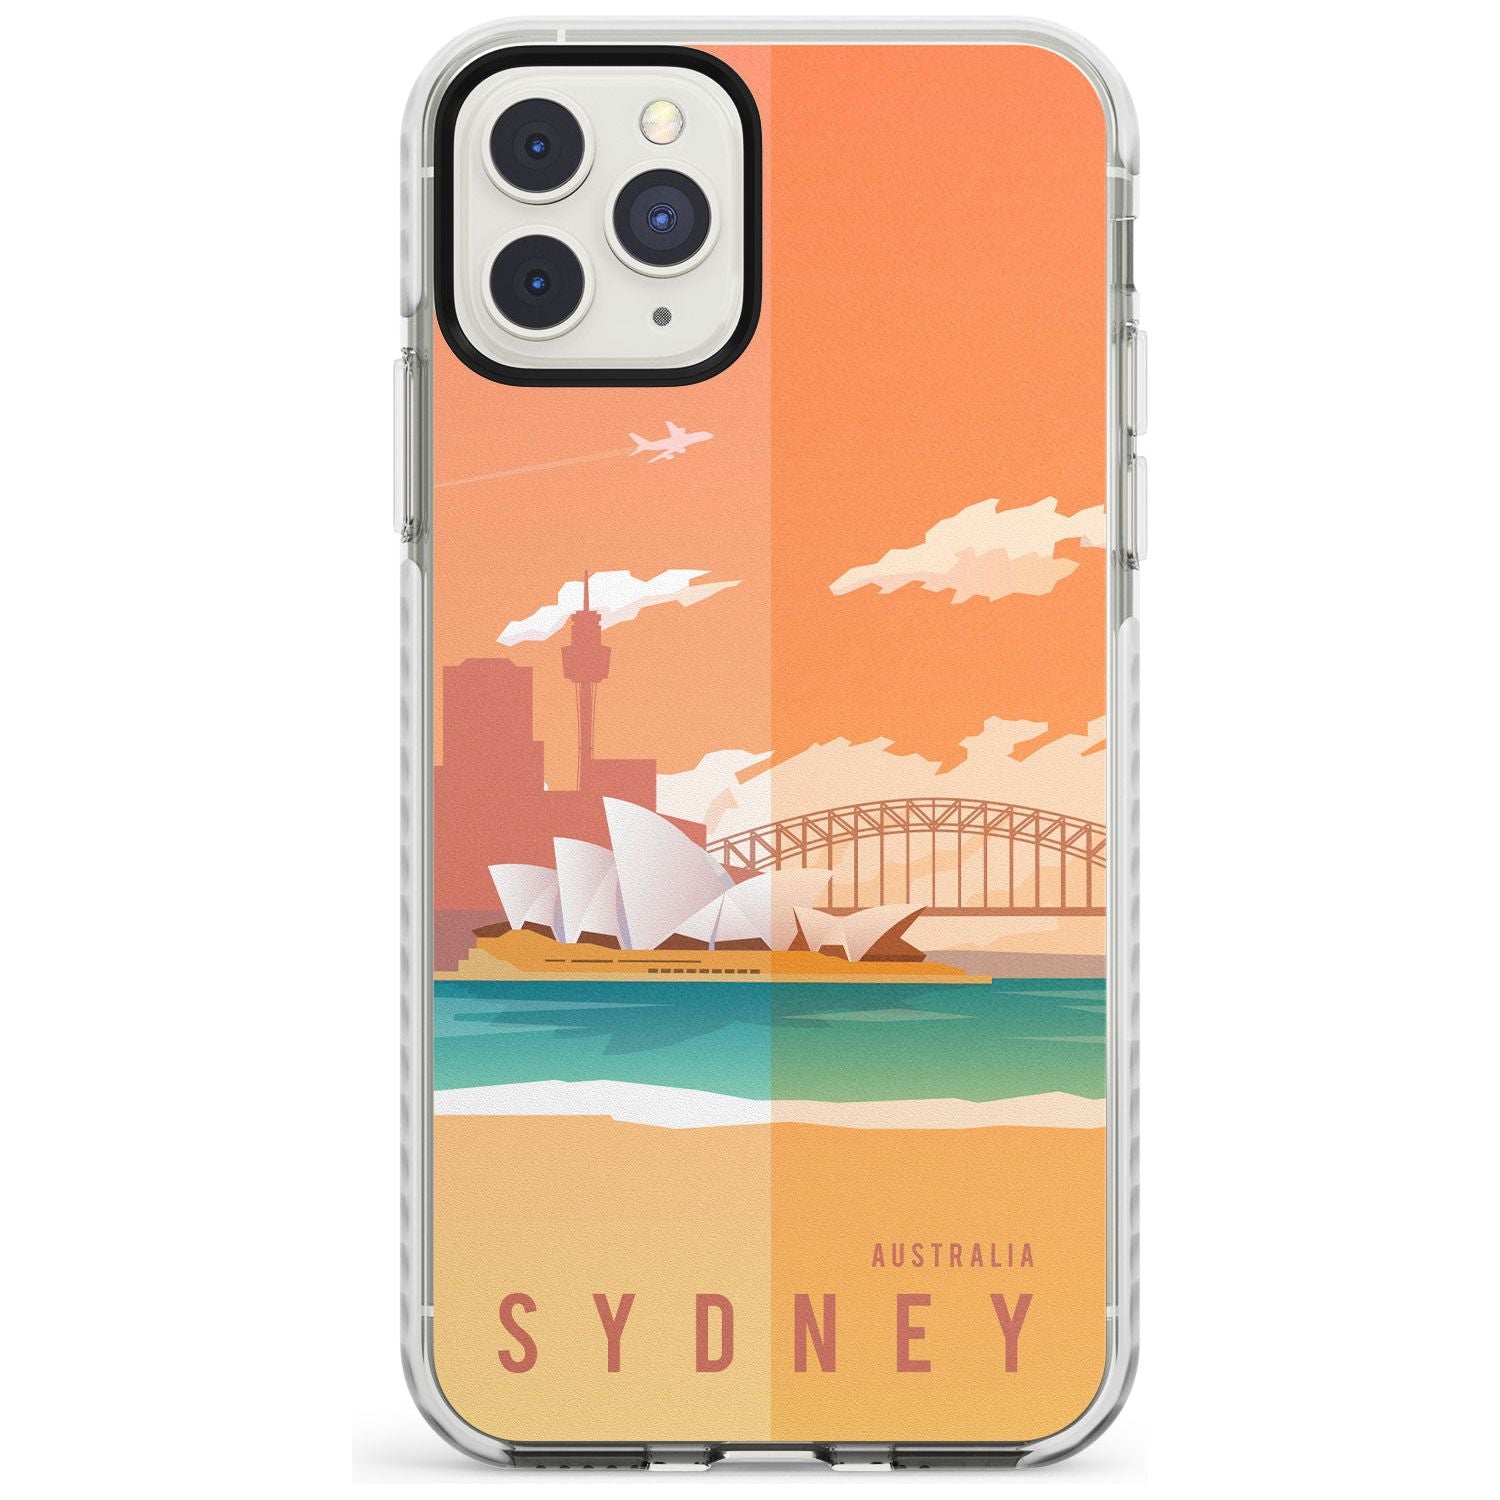 Vintage Travel Poster Sydney Impact Phone Case for iPhone 11 Pro Max